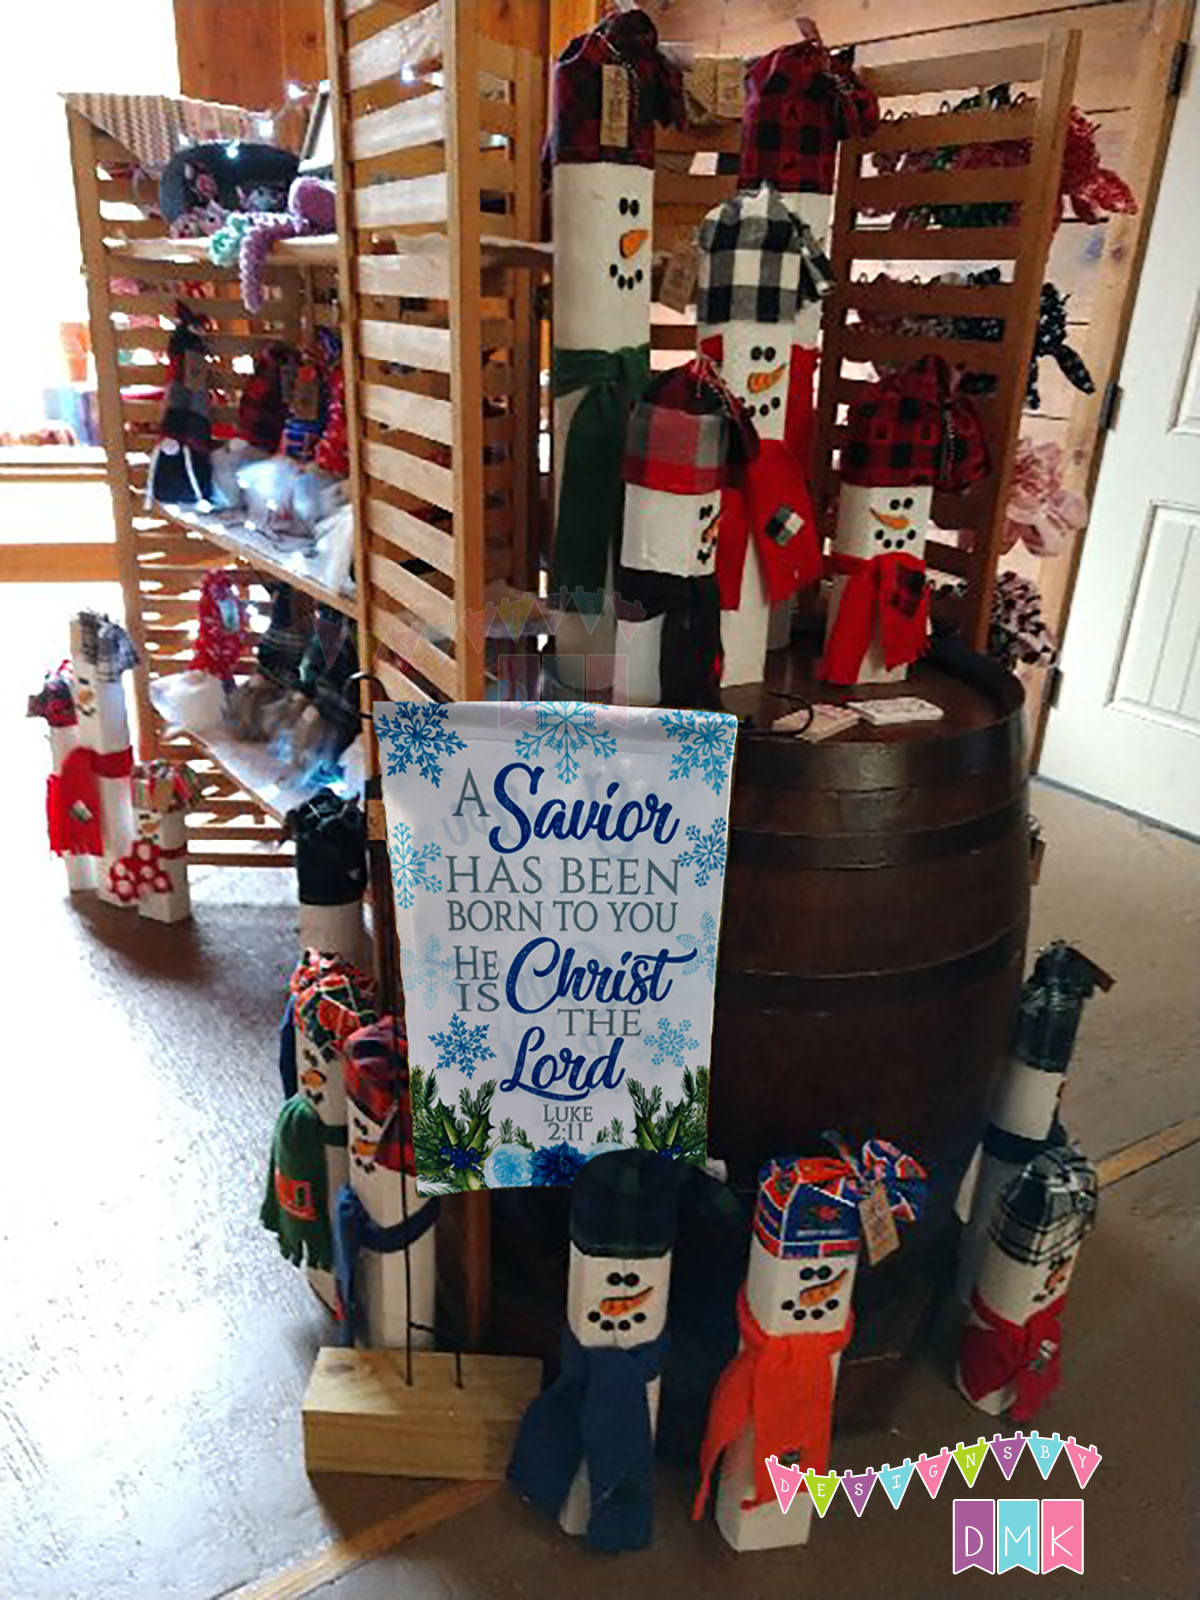 This is my retail market display at our local holiday market.   We take orders for all sorts of